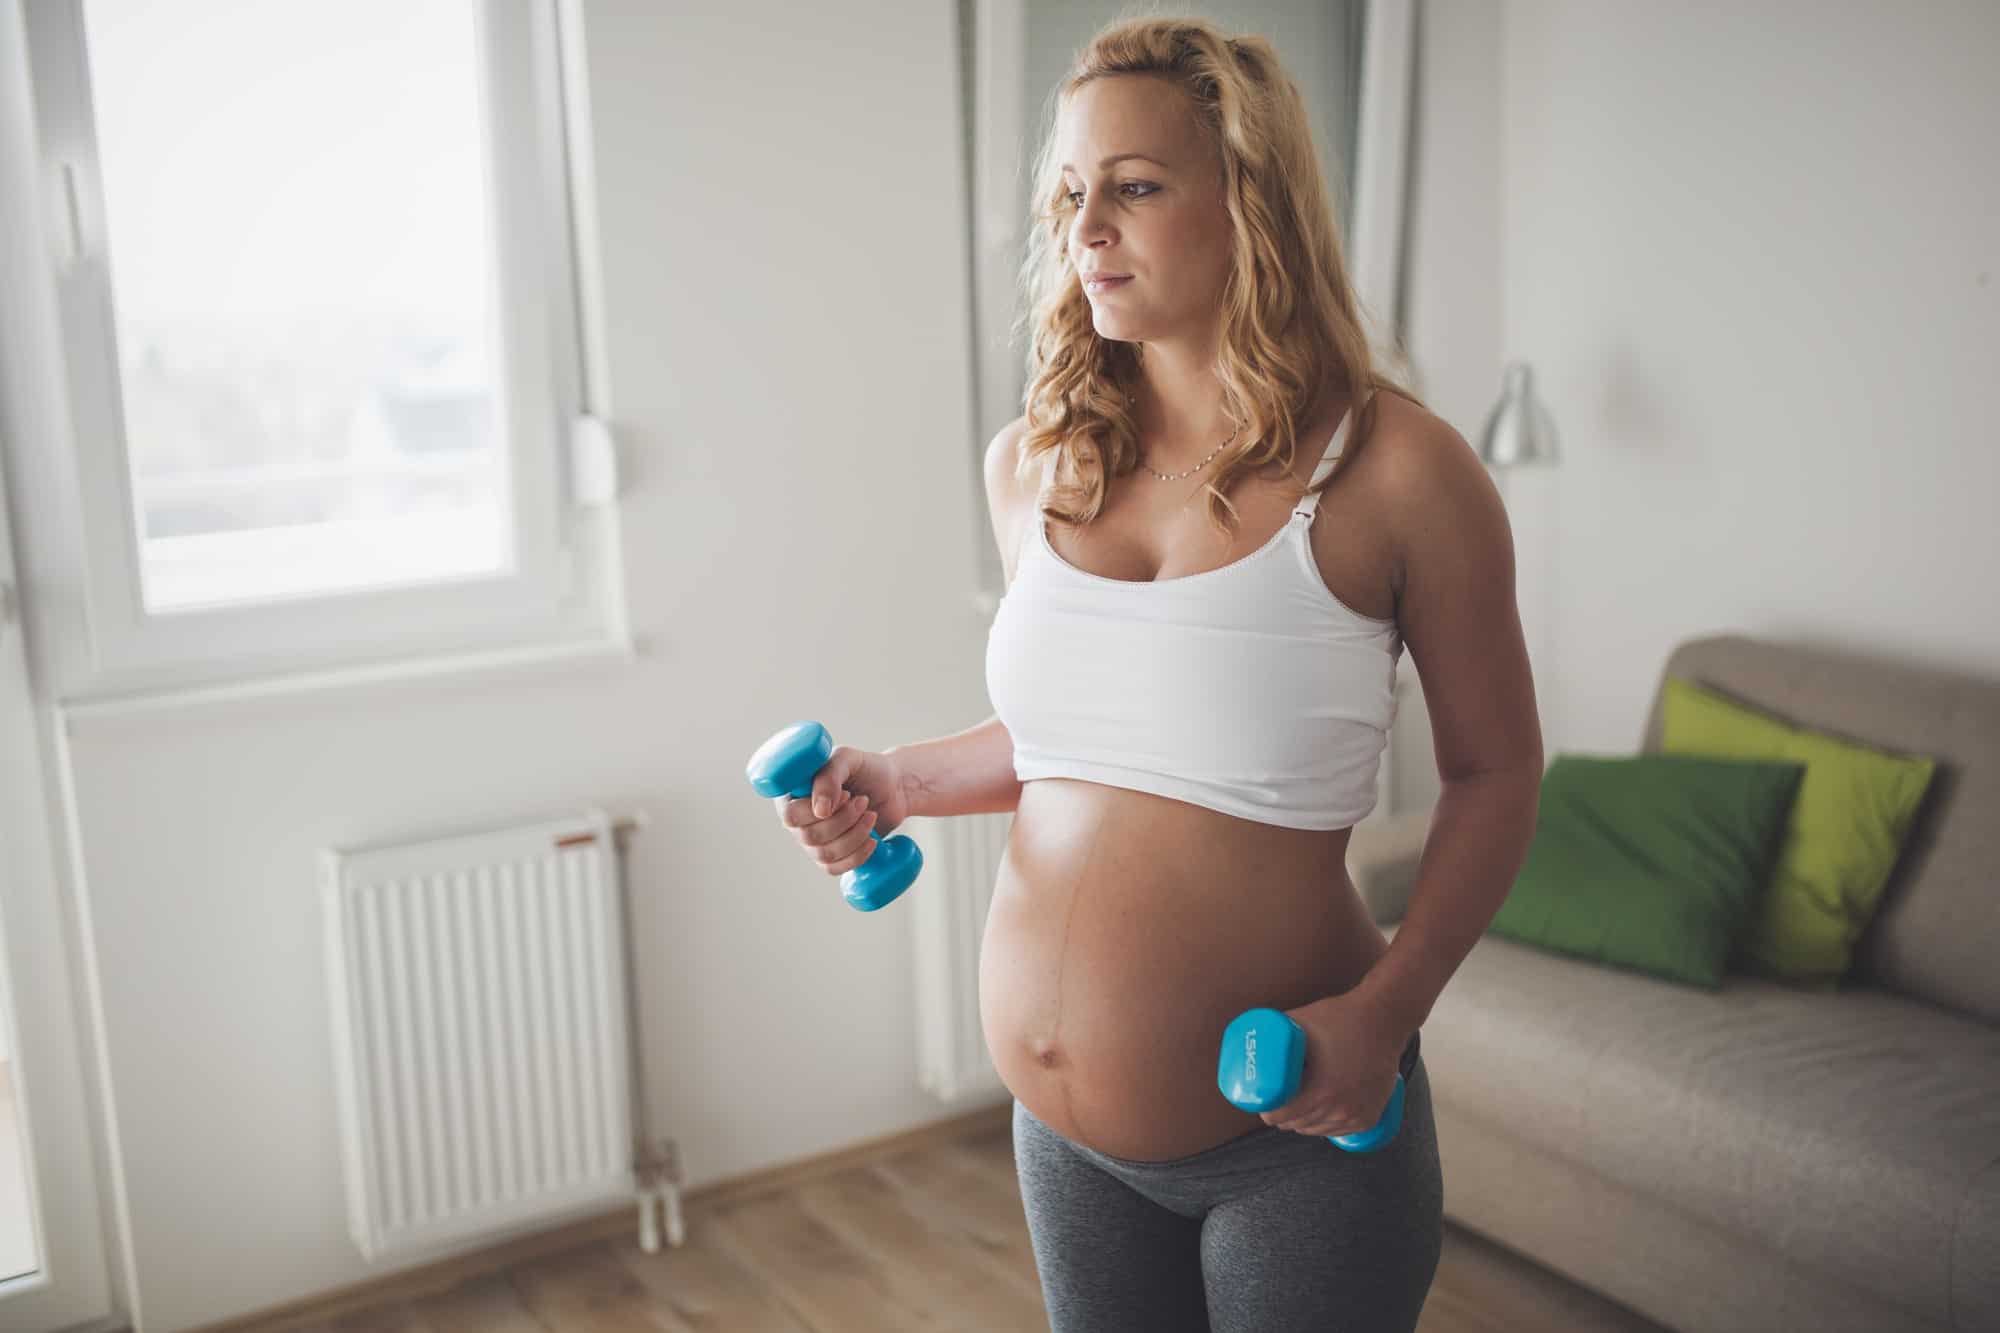 How to Deal with Lack of Energy During Pregnancy